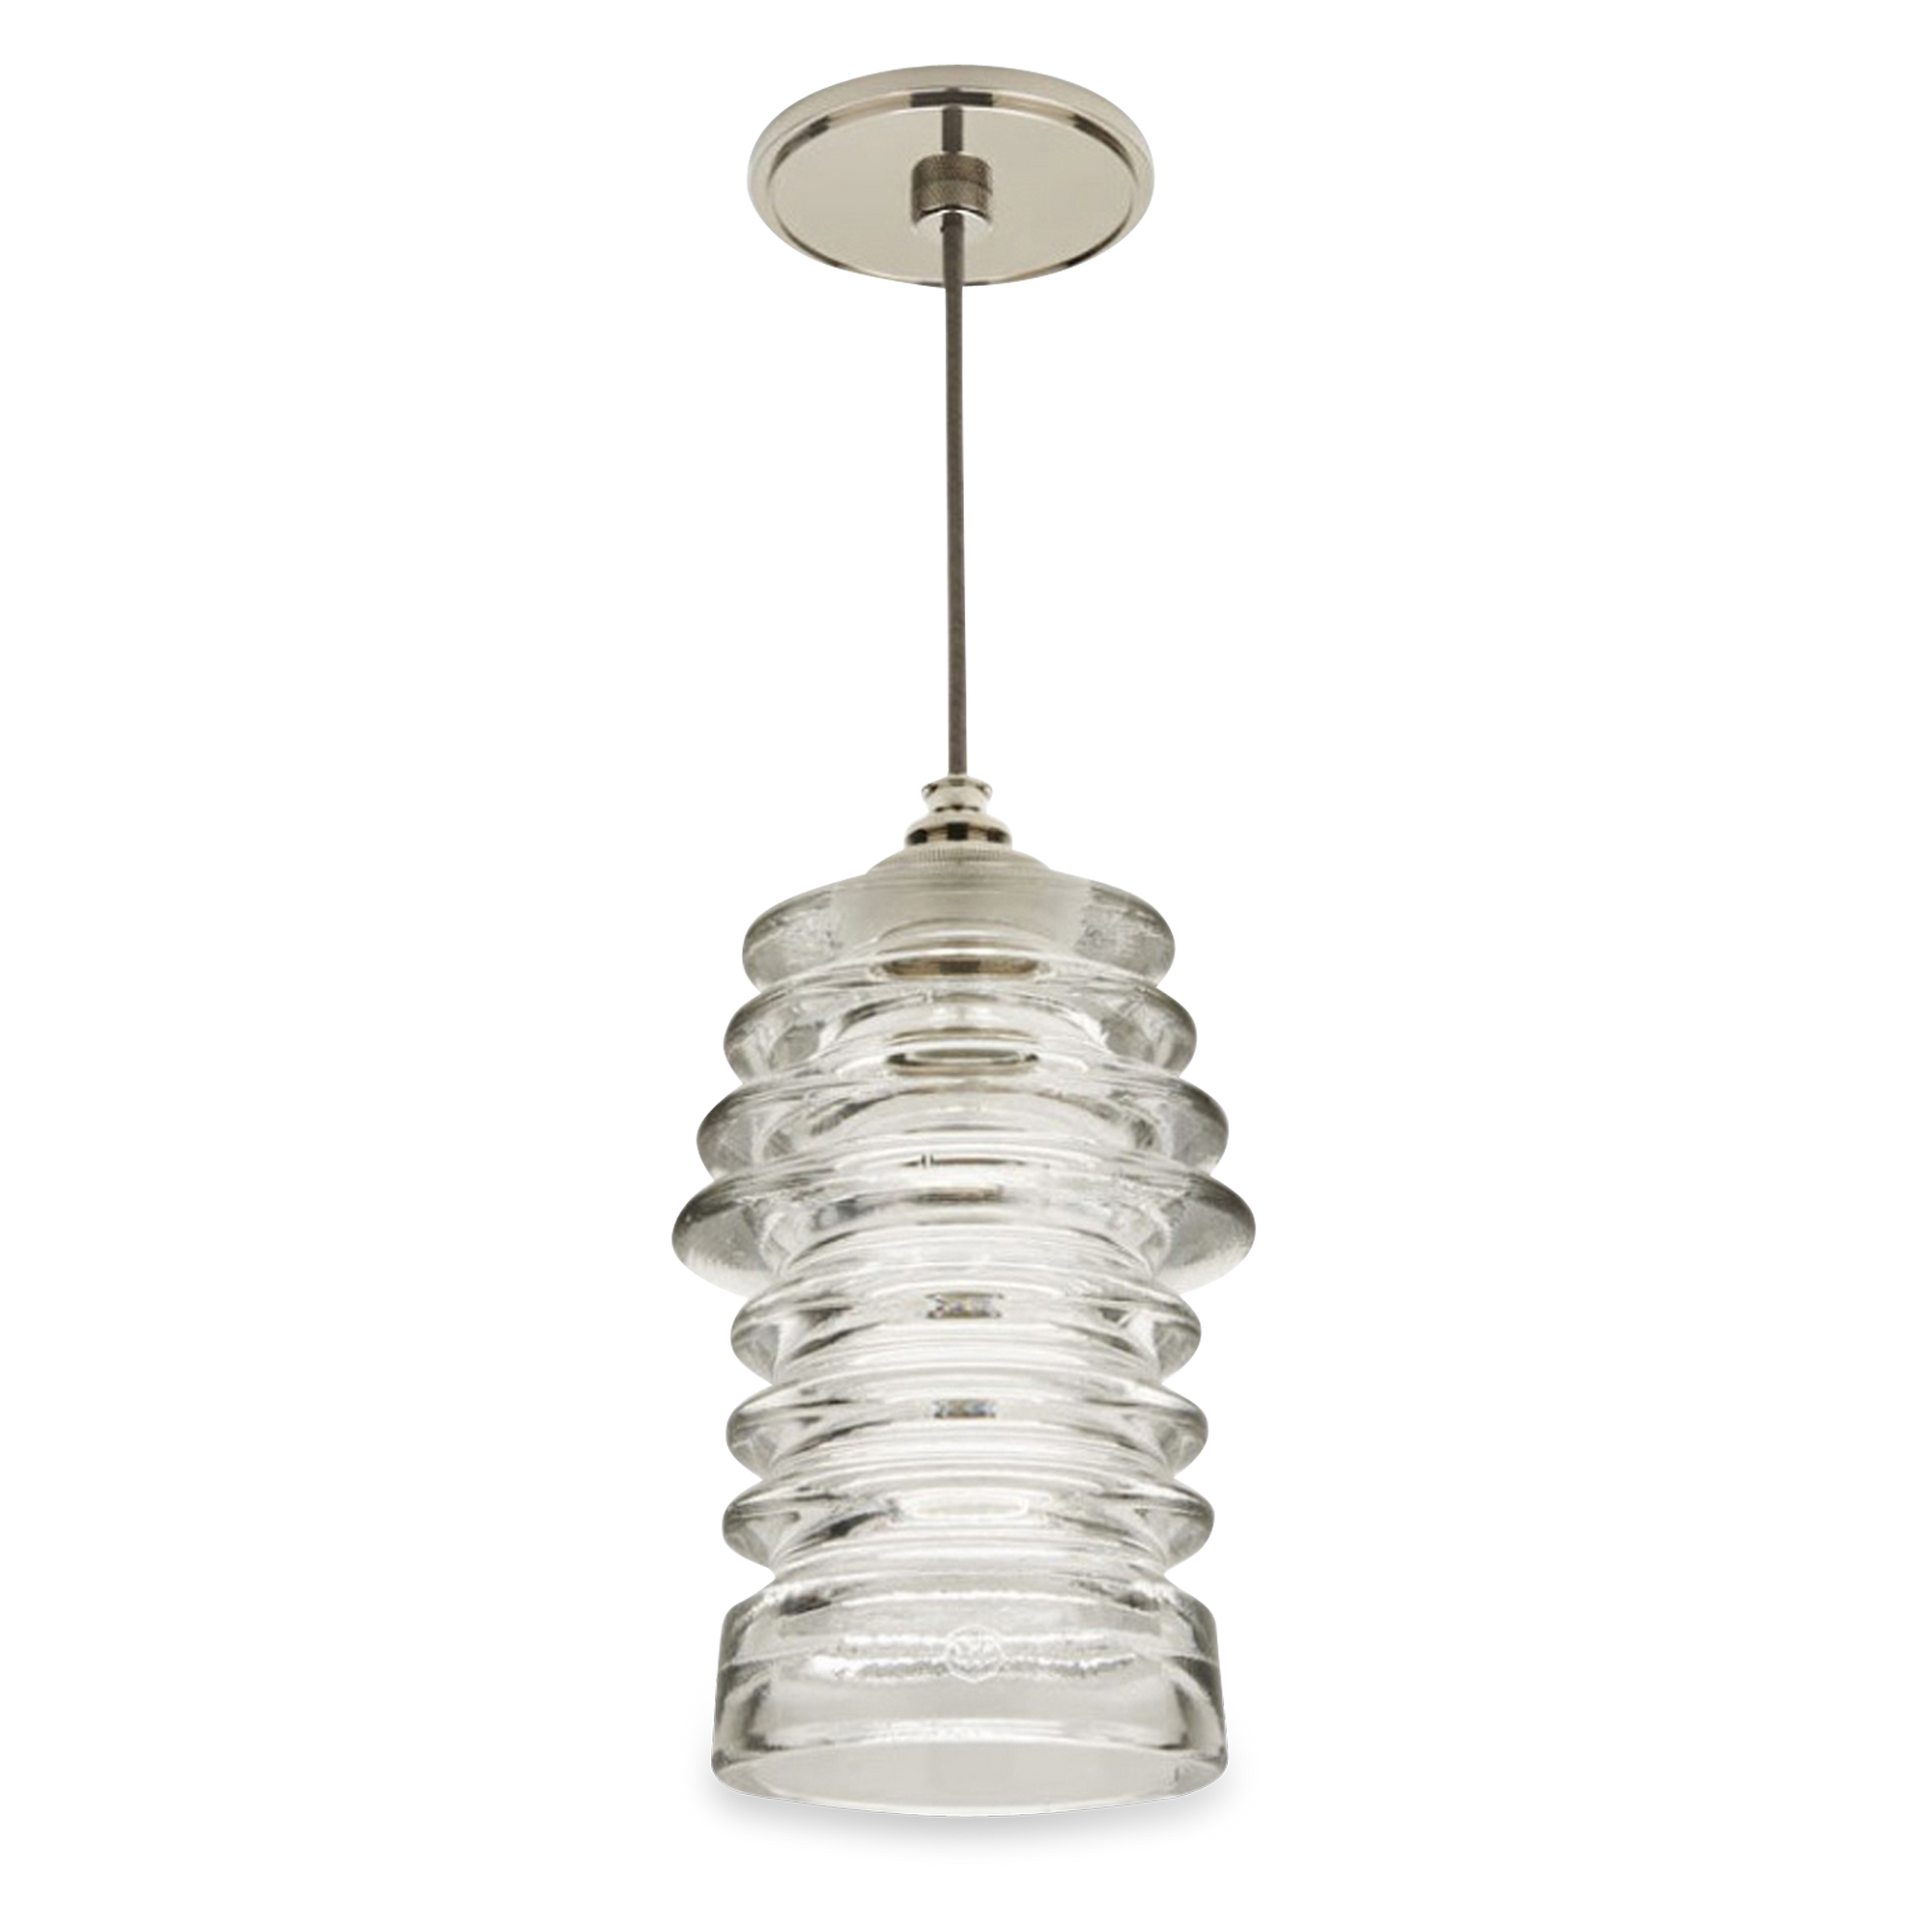 Inspired by the countless shapes and colours of telephone pole insulator covers, the Watt pendant features a molded clear glass shade and is an original interpretation of a vintage